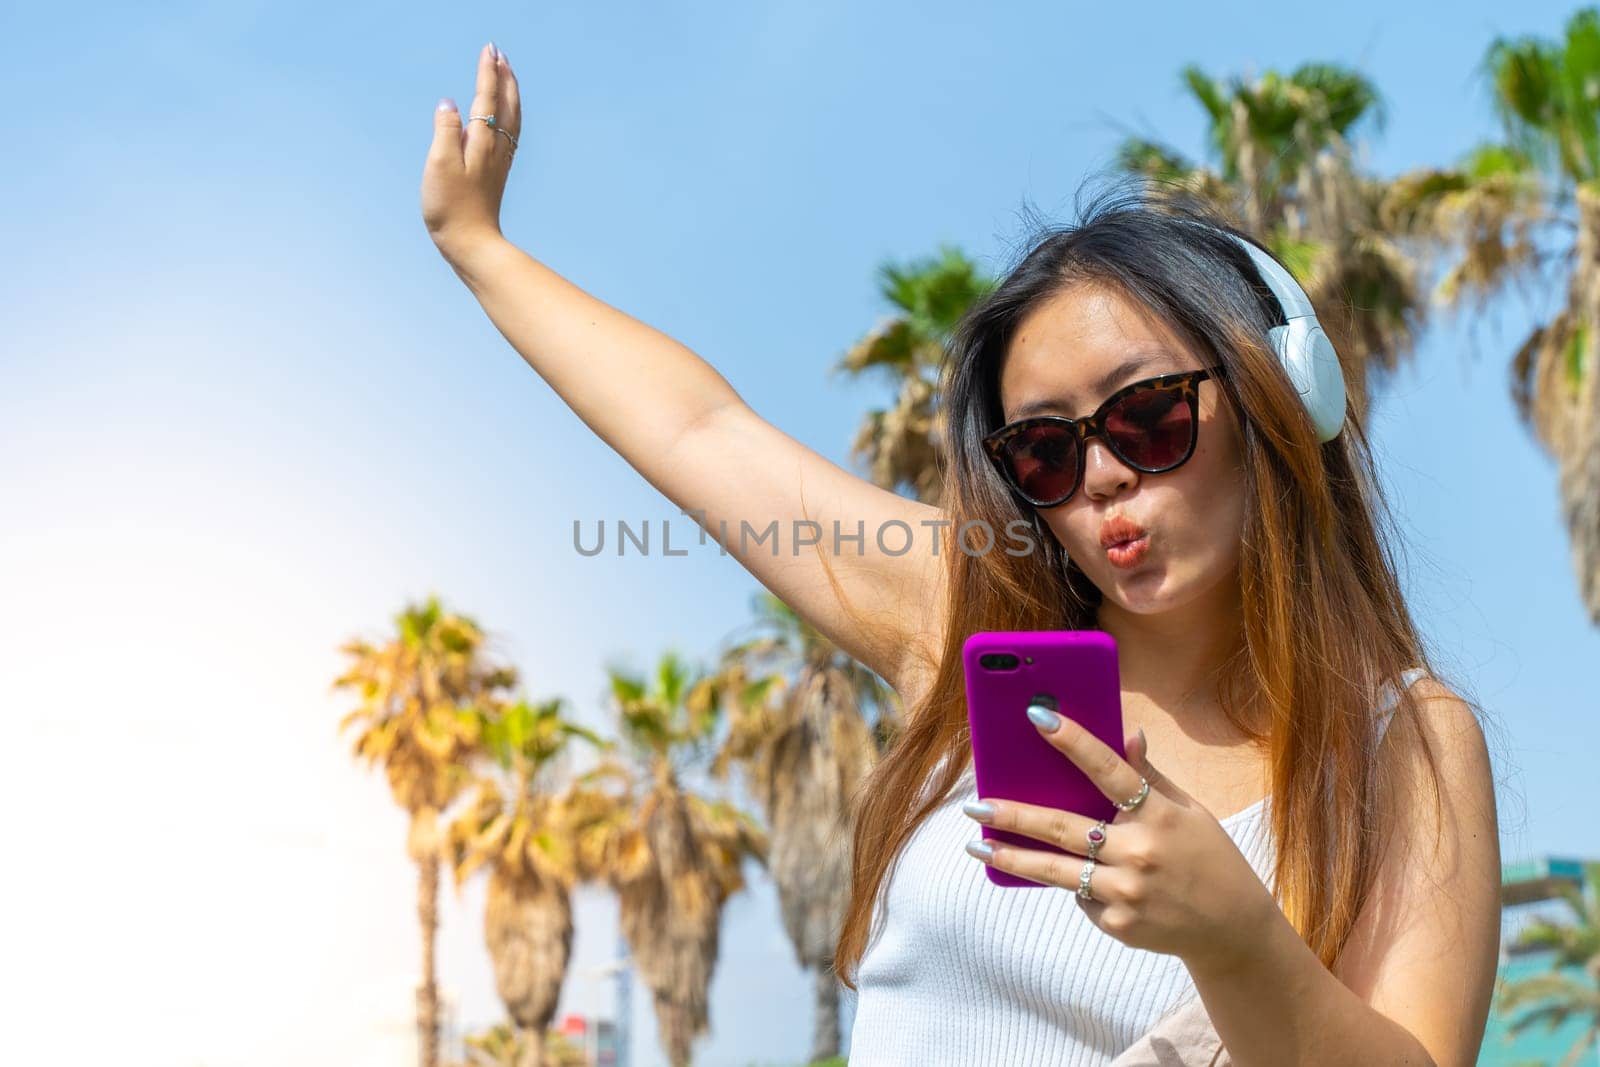 Chinese girl in headphones dancing music outdoor on summer. by PaulCarr